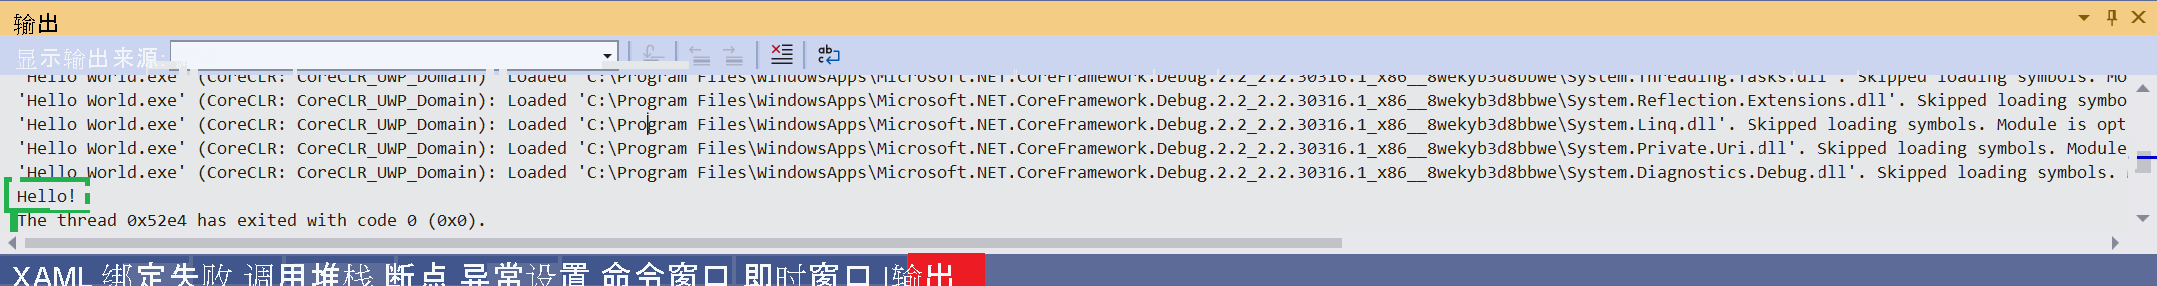 Screenshot showing the Visual Studio output window with the Hello! message shown.